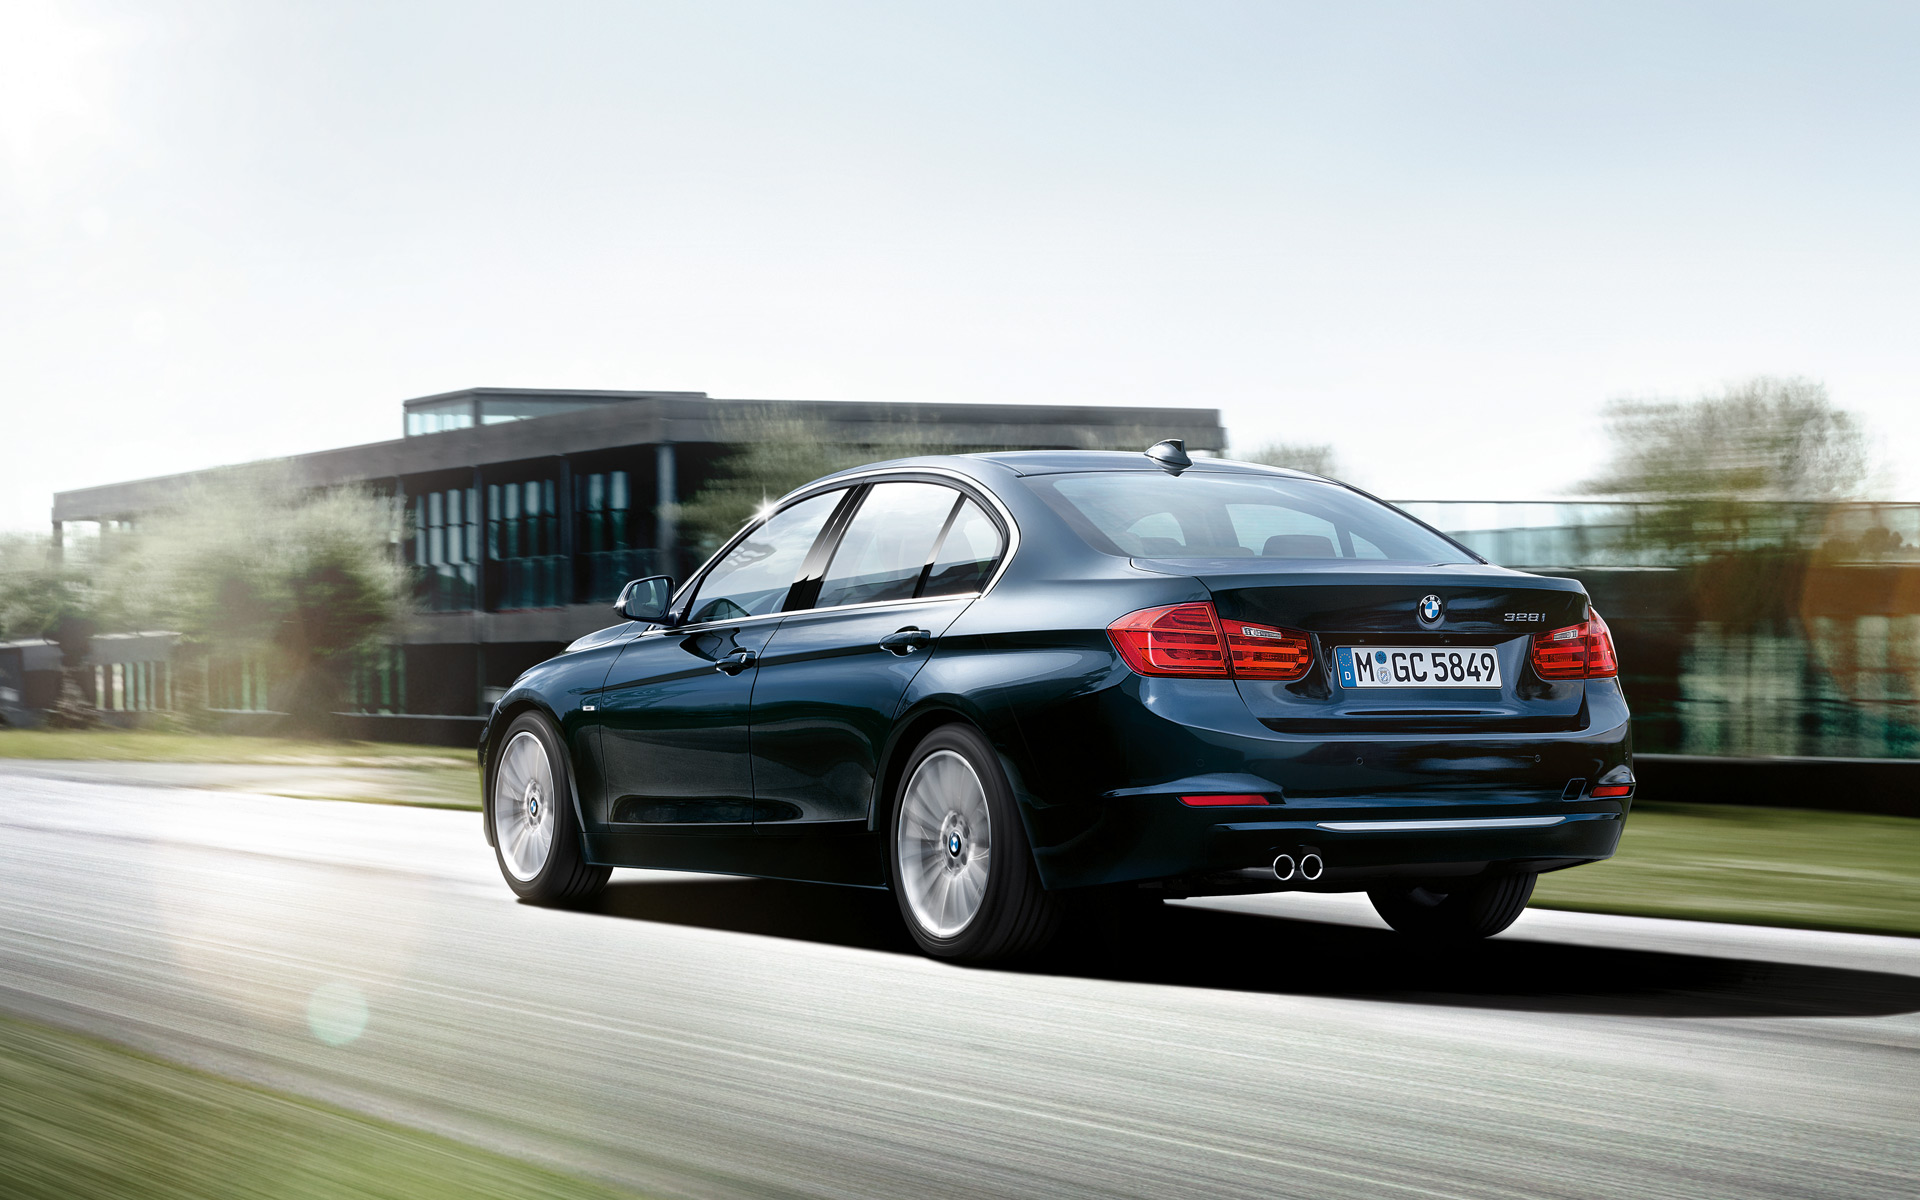 Bmw 3 Series Wallpapers